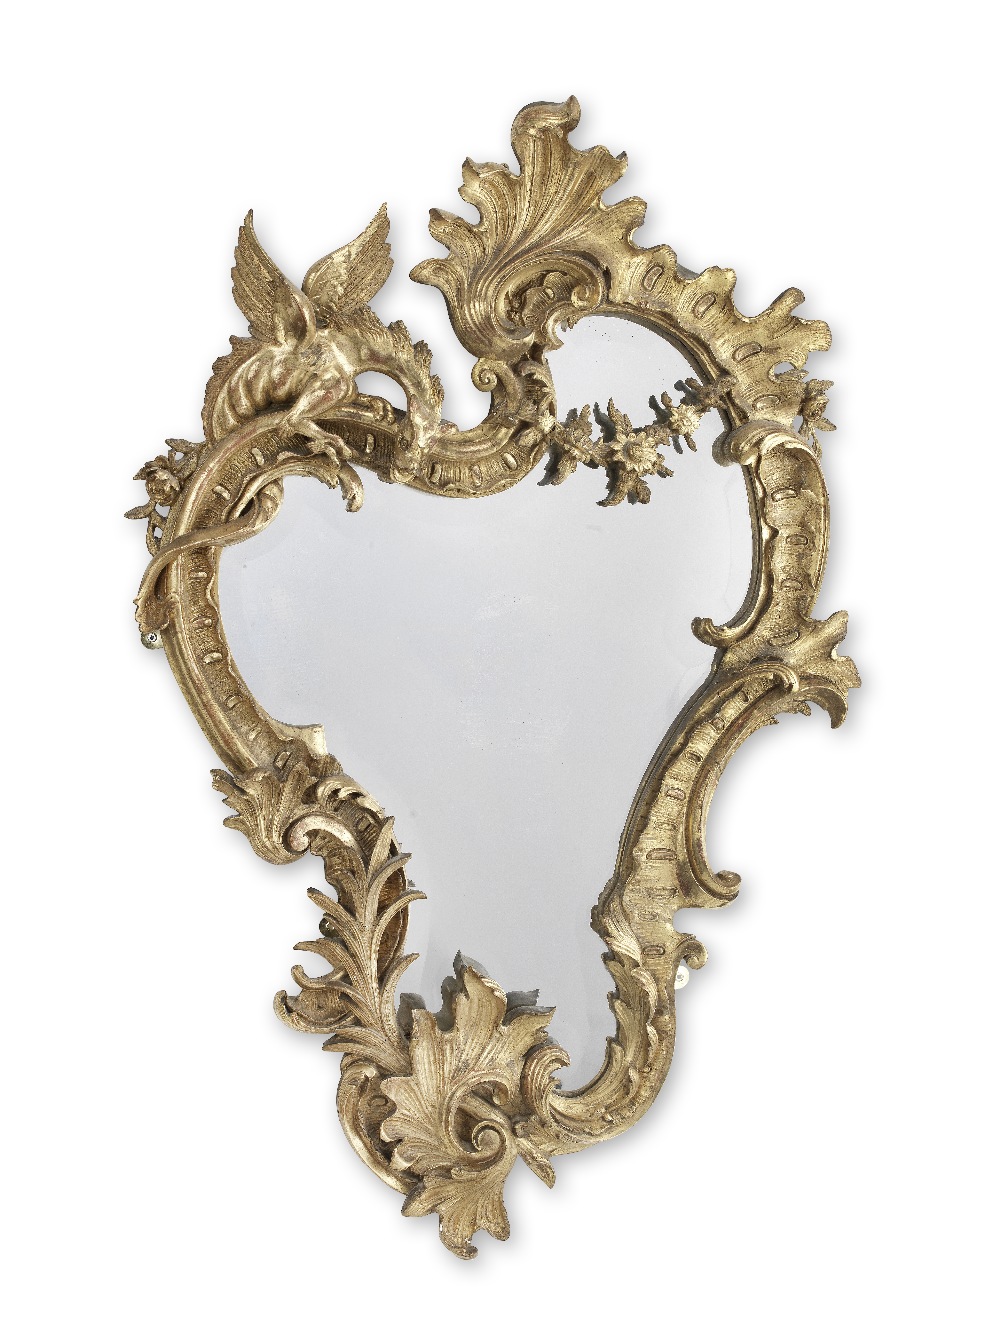 A late 19th century gilt composition mirror in the Louis XV Rococo style